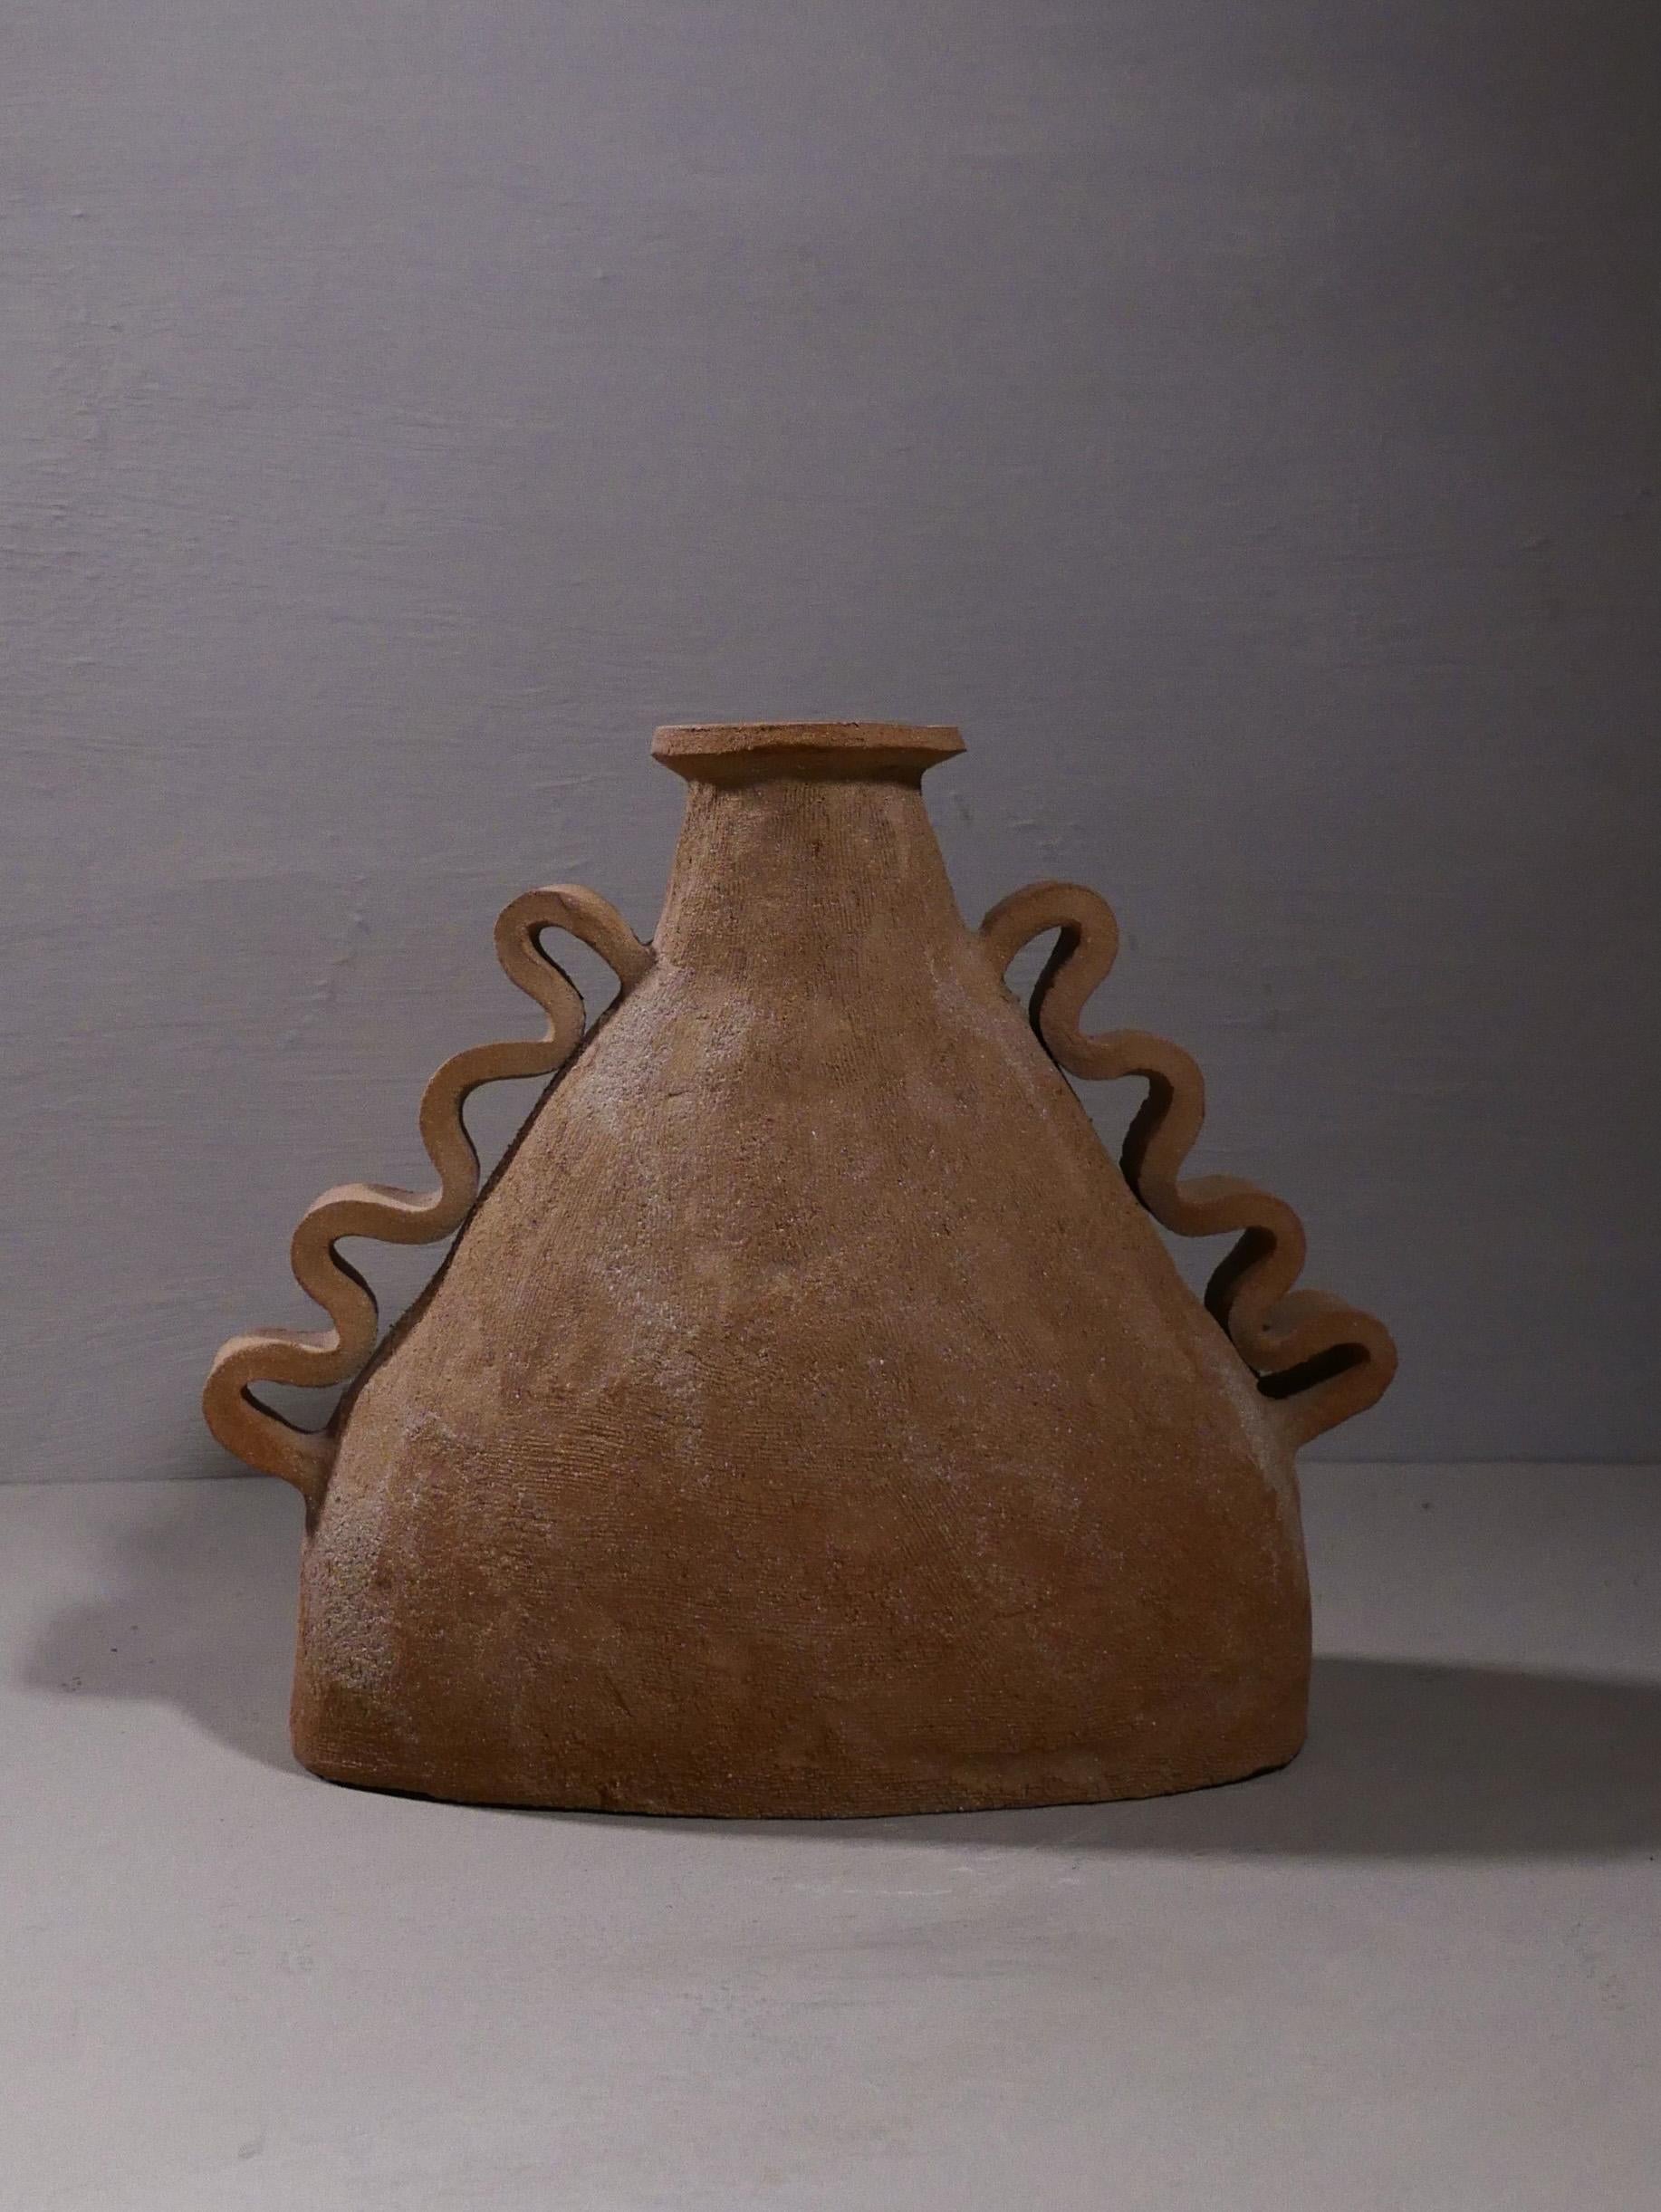 One-of-a-kind vase with wiggly handles, hand-built in Spain by artist Sophie Agullo. This piece feels like it was dug out of the ground, with a beautiful brown, sandy, textured finish. The interior is glazed with a warm white color, making the piece